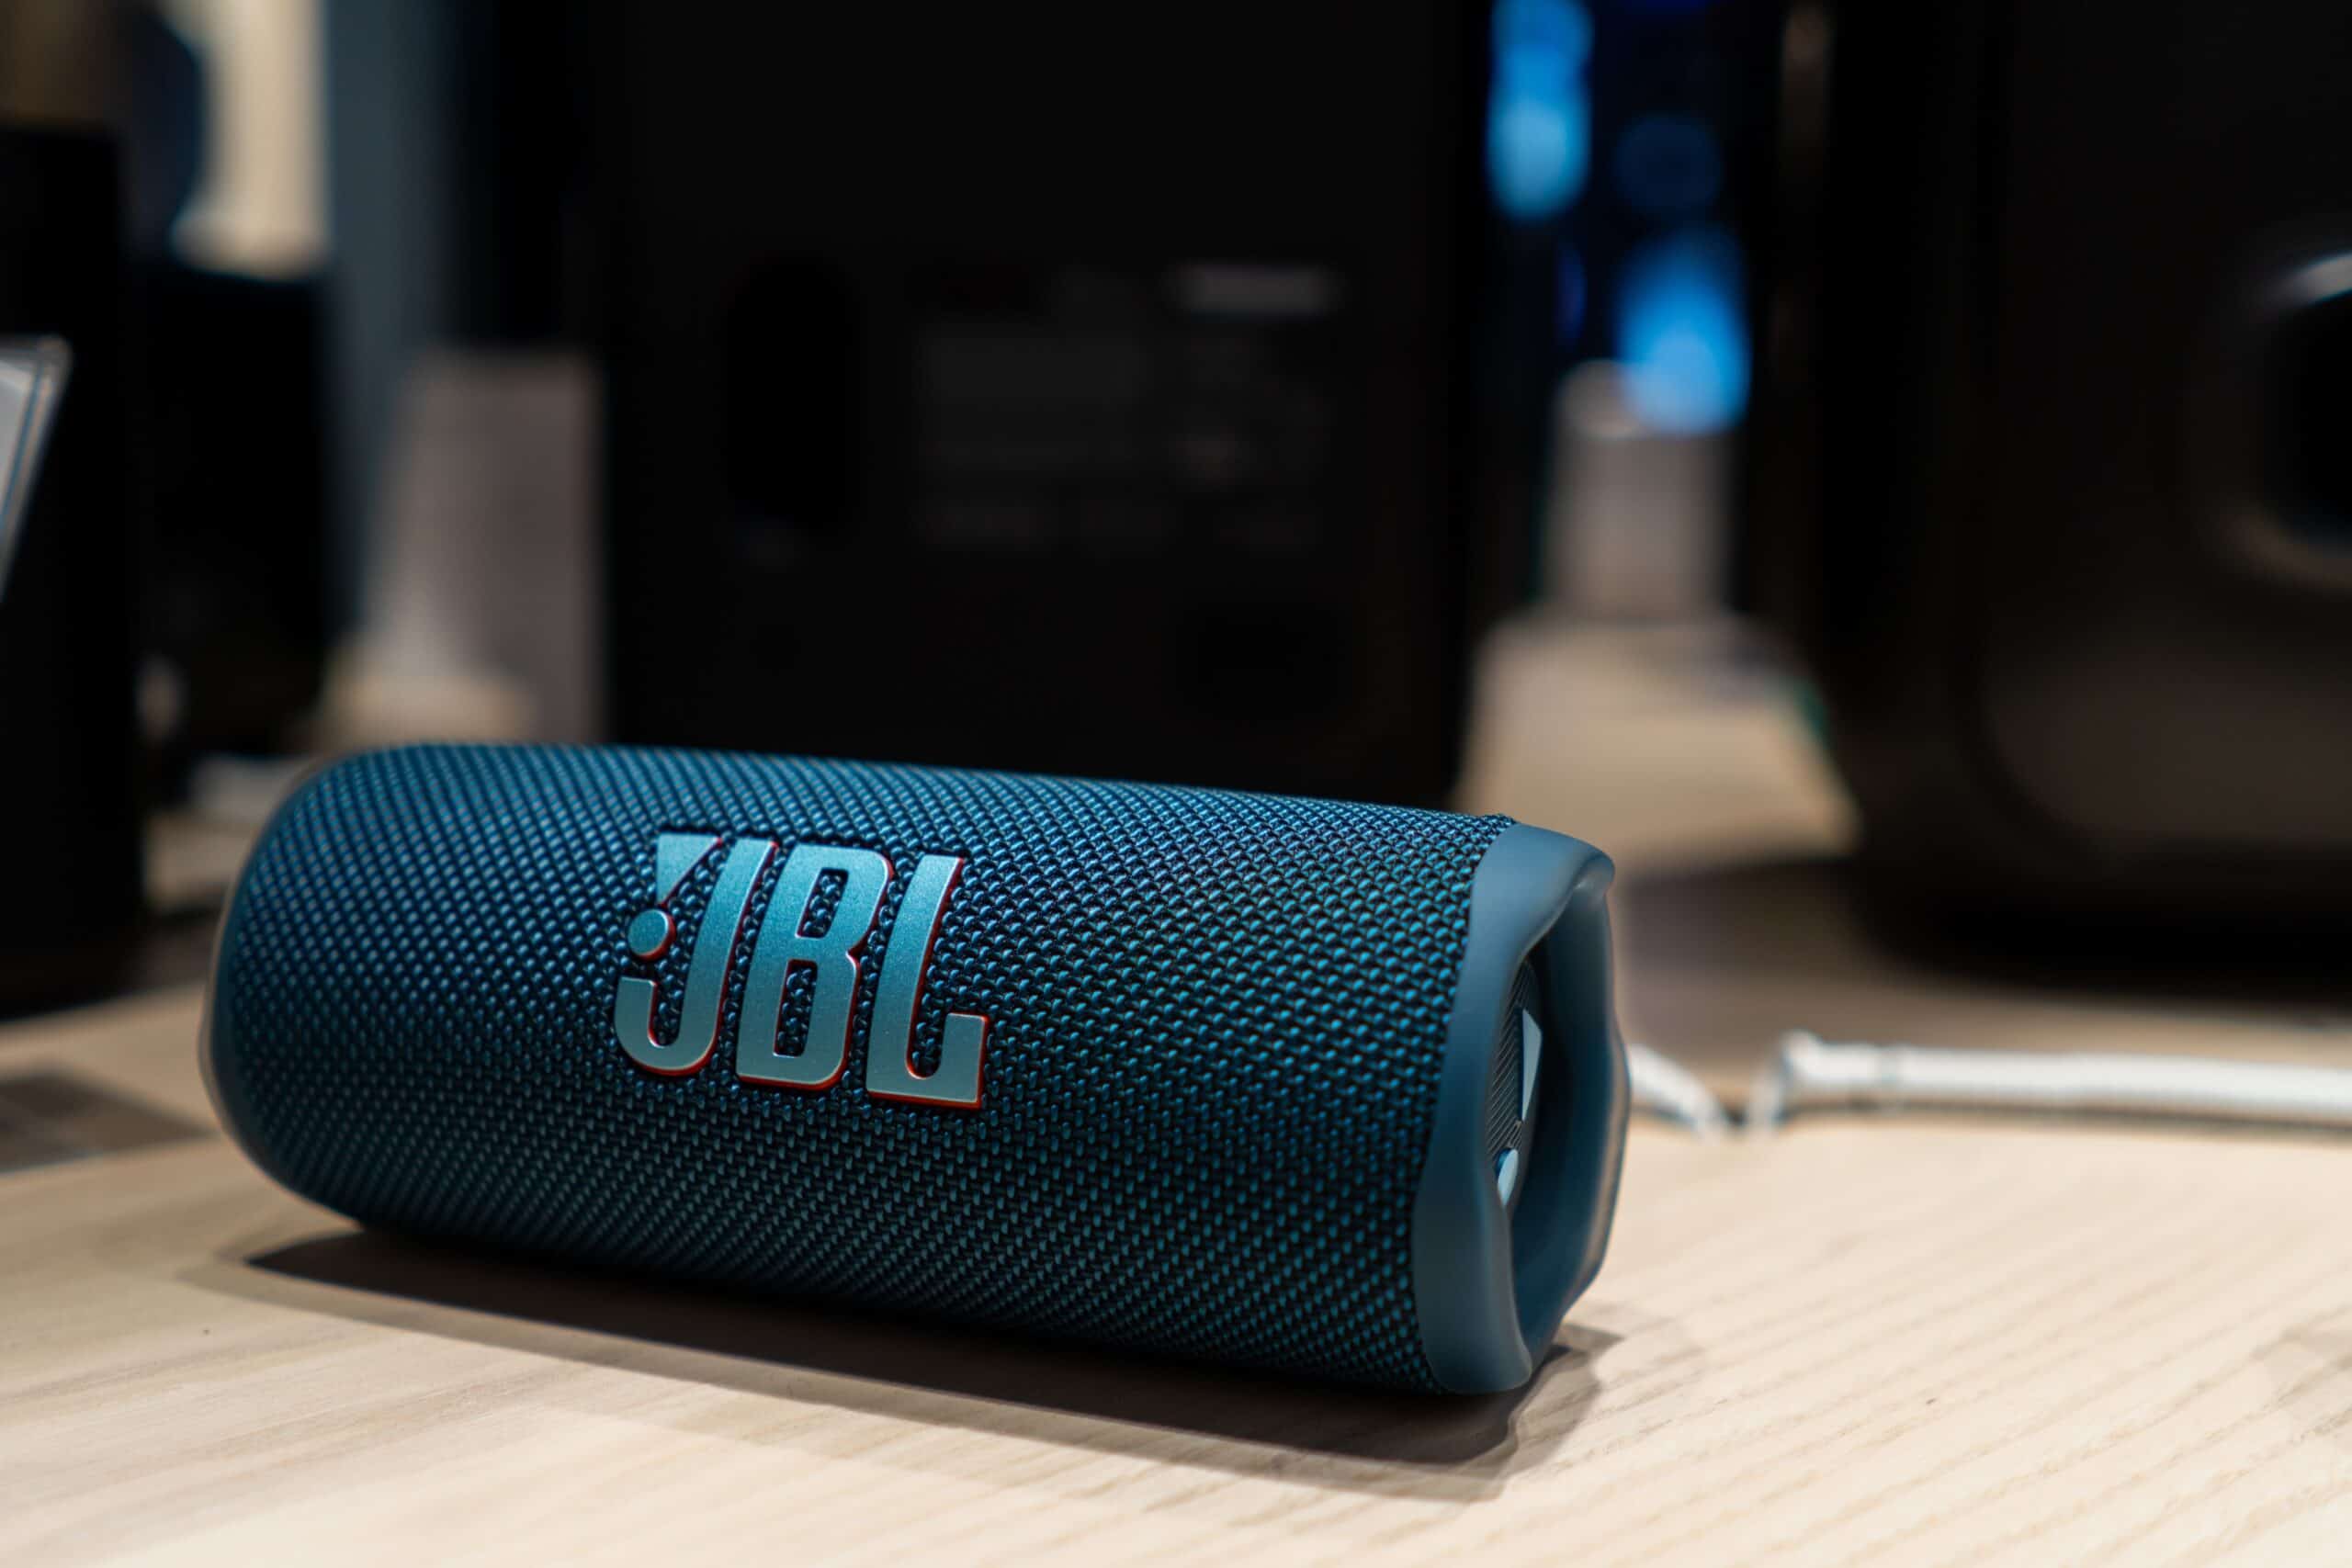  JBL Charge 5 Portable Wireless Bluetooth Speaker with IP67  Waterproof and USB Charge Out - Black, small : Electronics